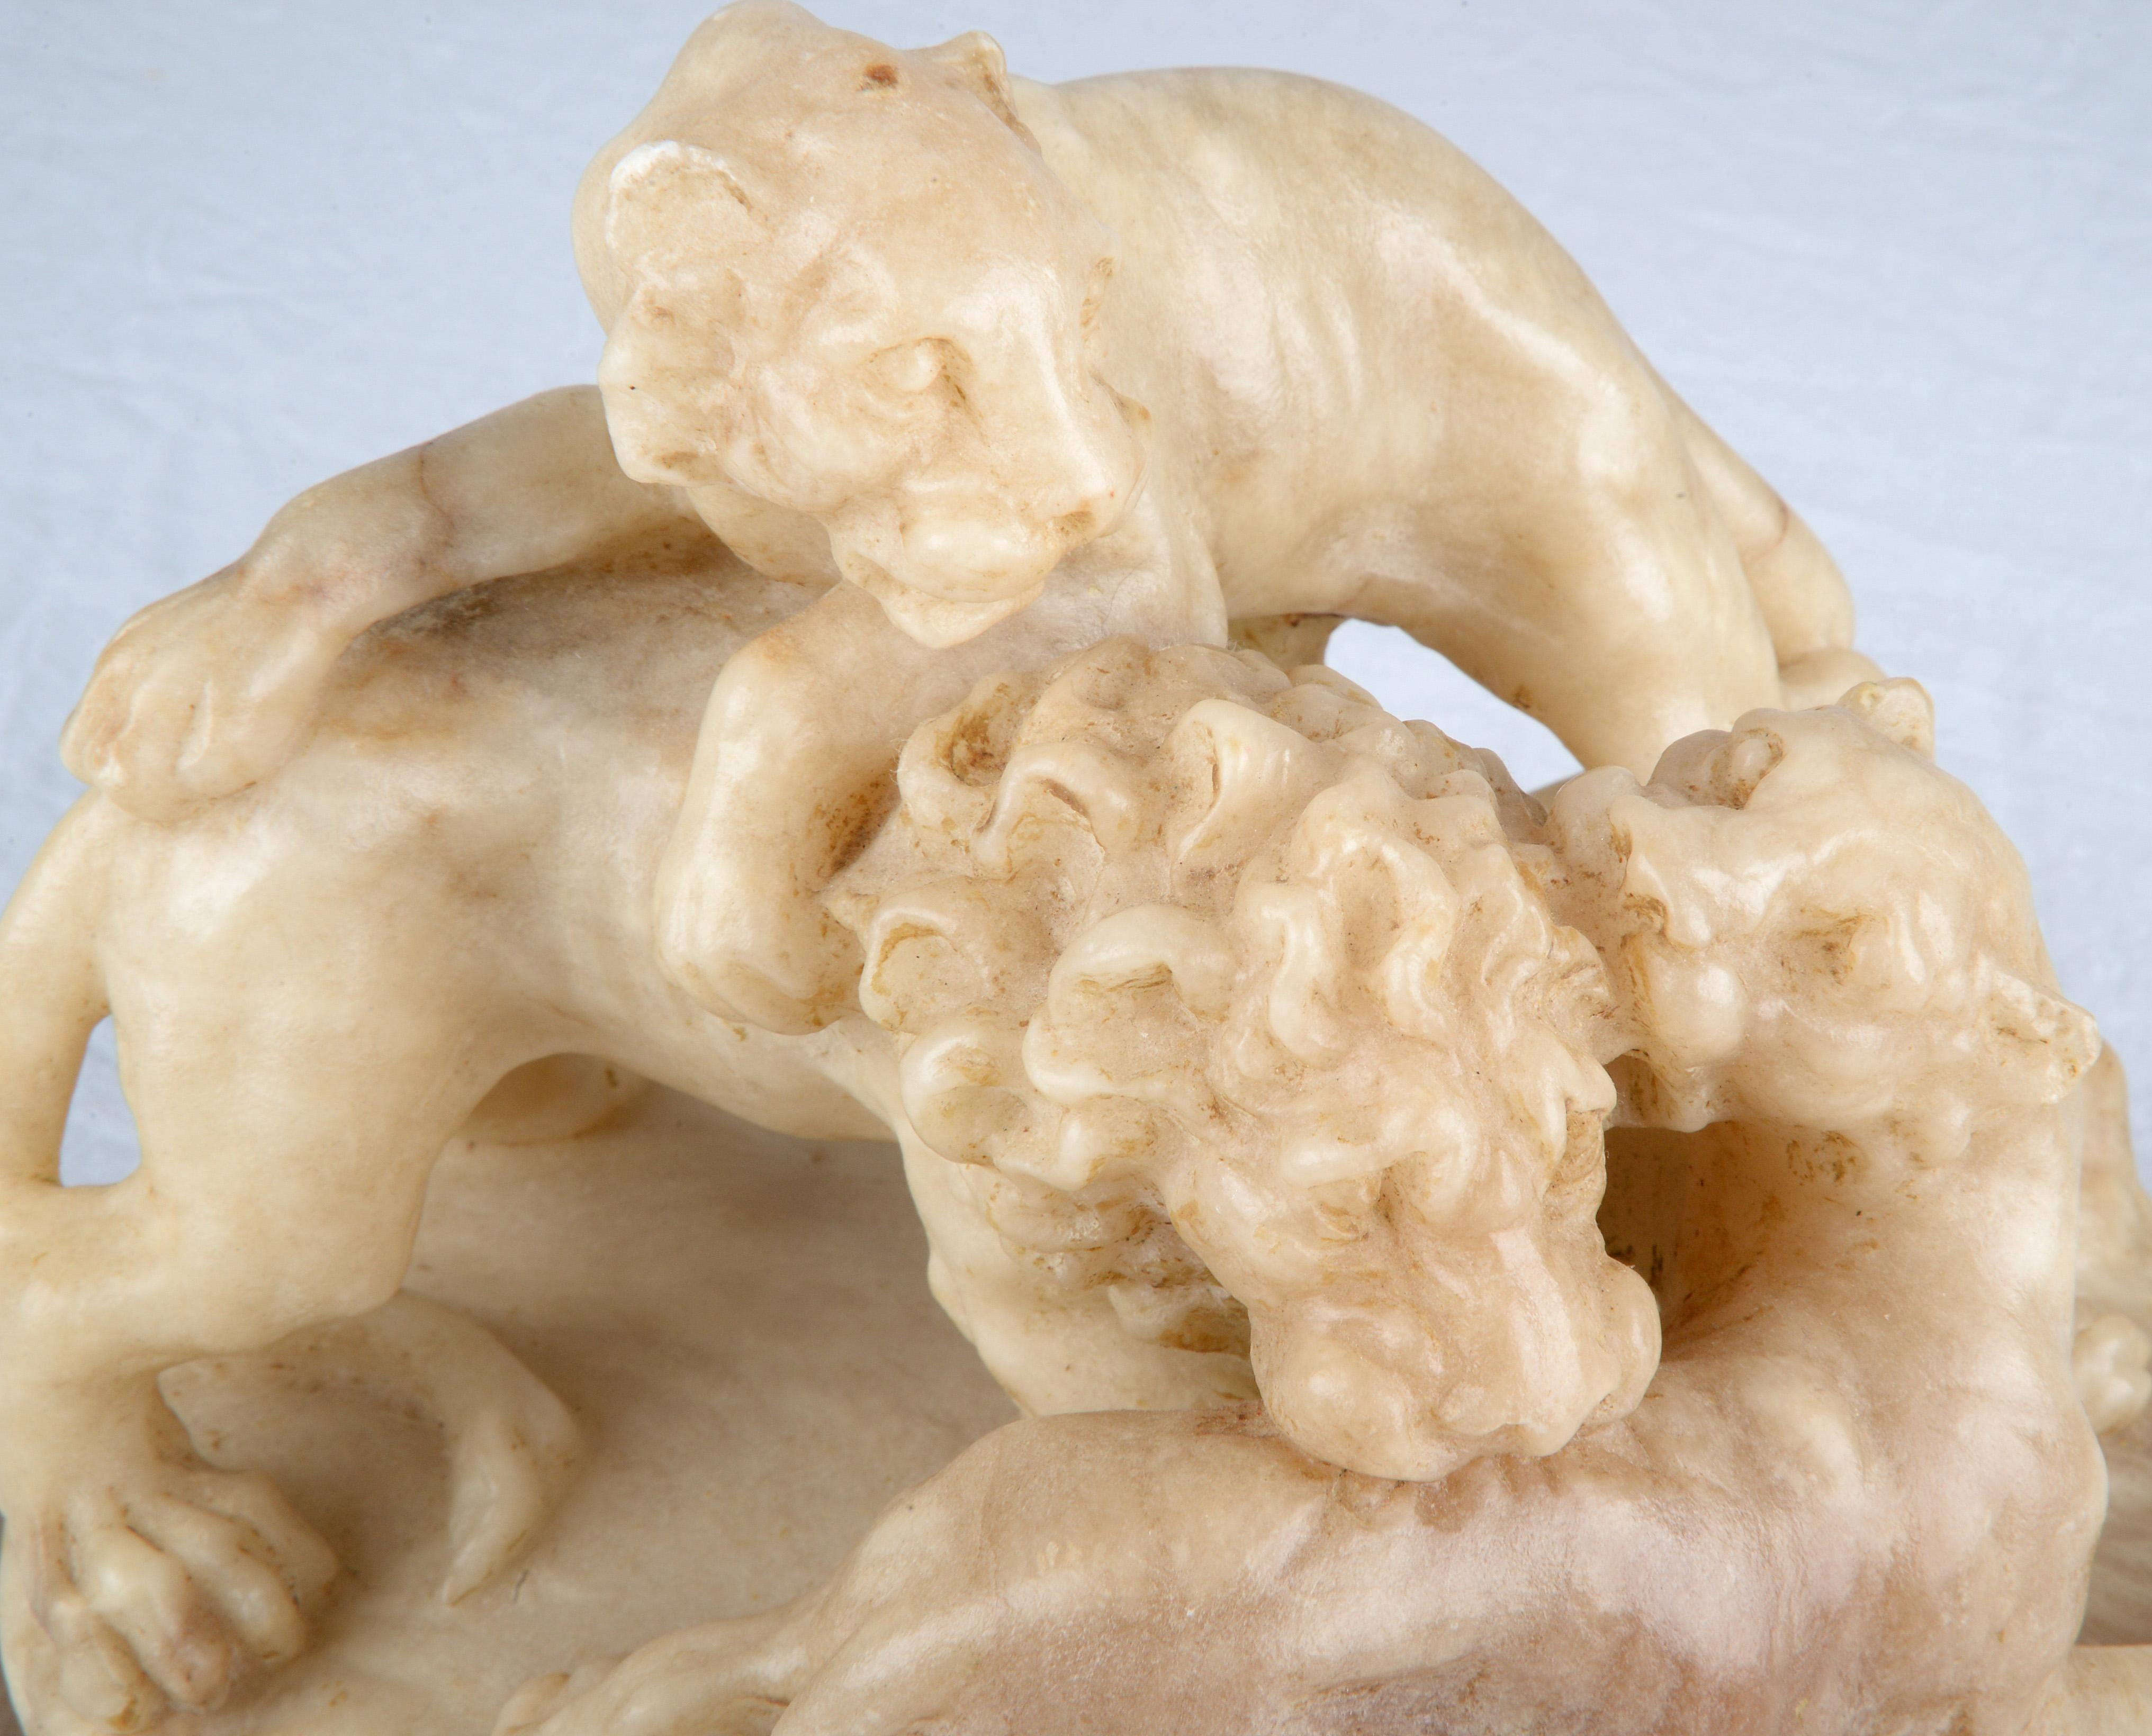 Alabaster group of three lions playing on a naturalistic base, raised on a gilt-edged plinth.

From England, Spain, and France, to the Low Countries, Germany, and Poland, alabaster was a popular material in European sculpture, in particular between